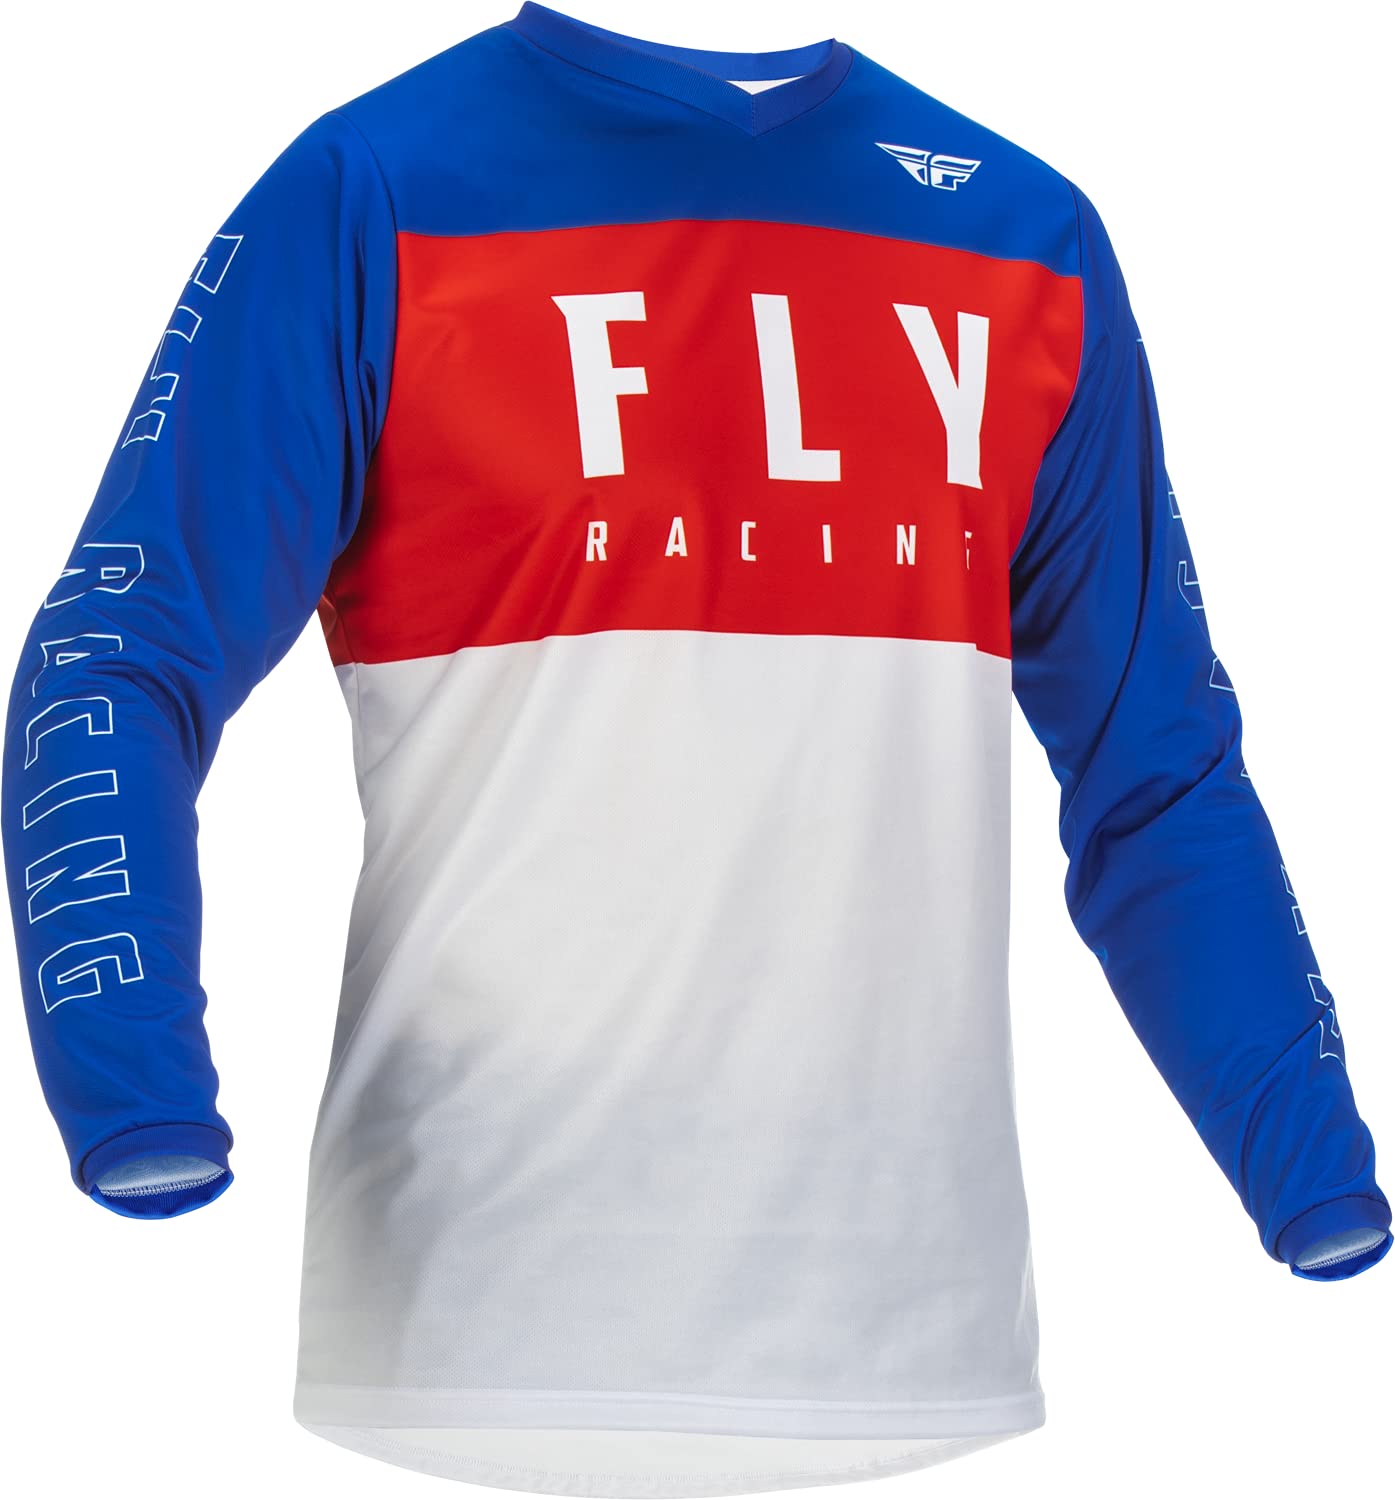 Fly MX-Jersey Youth F-16 Red-White-Blue (YL) von Fly Racing